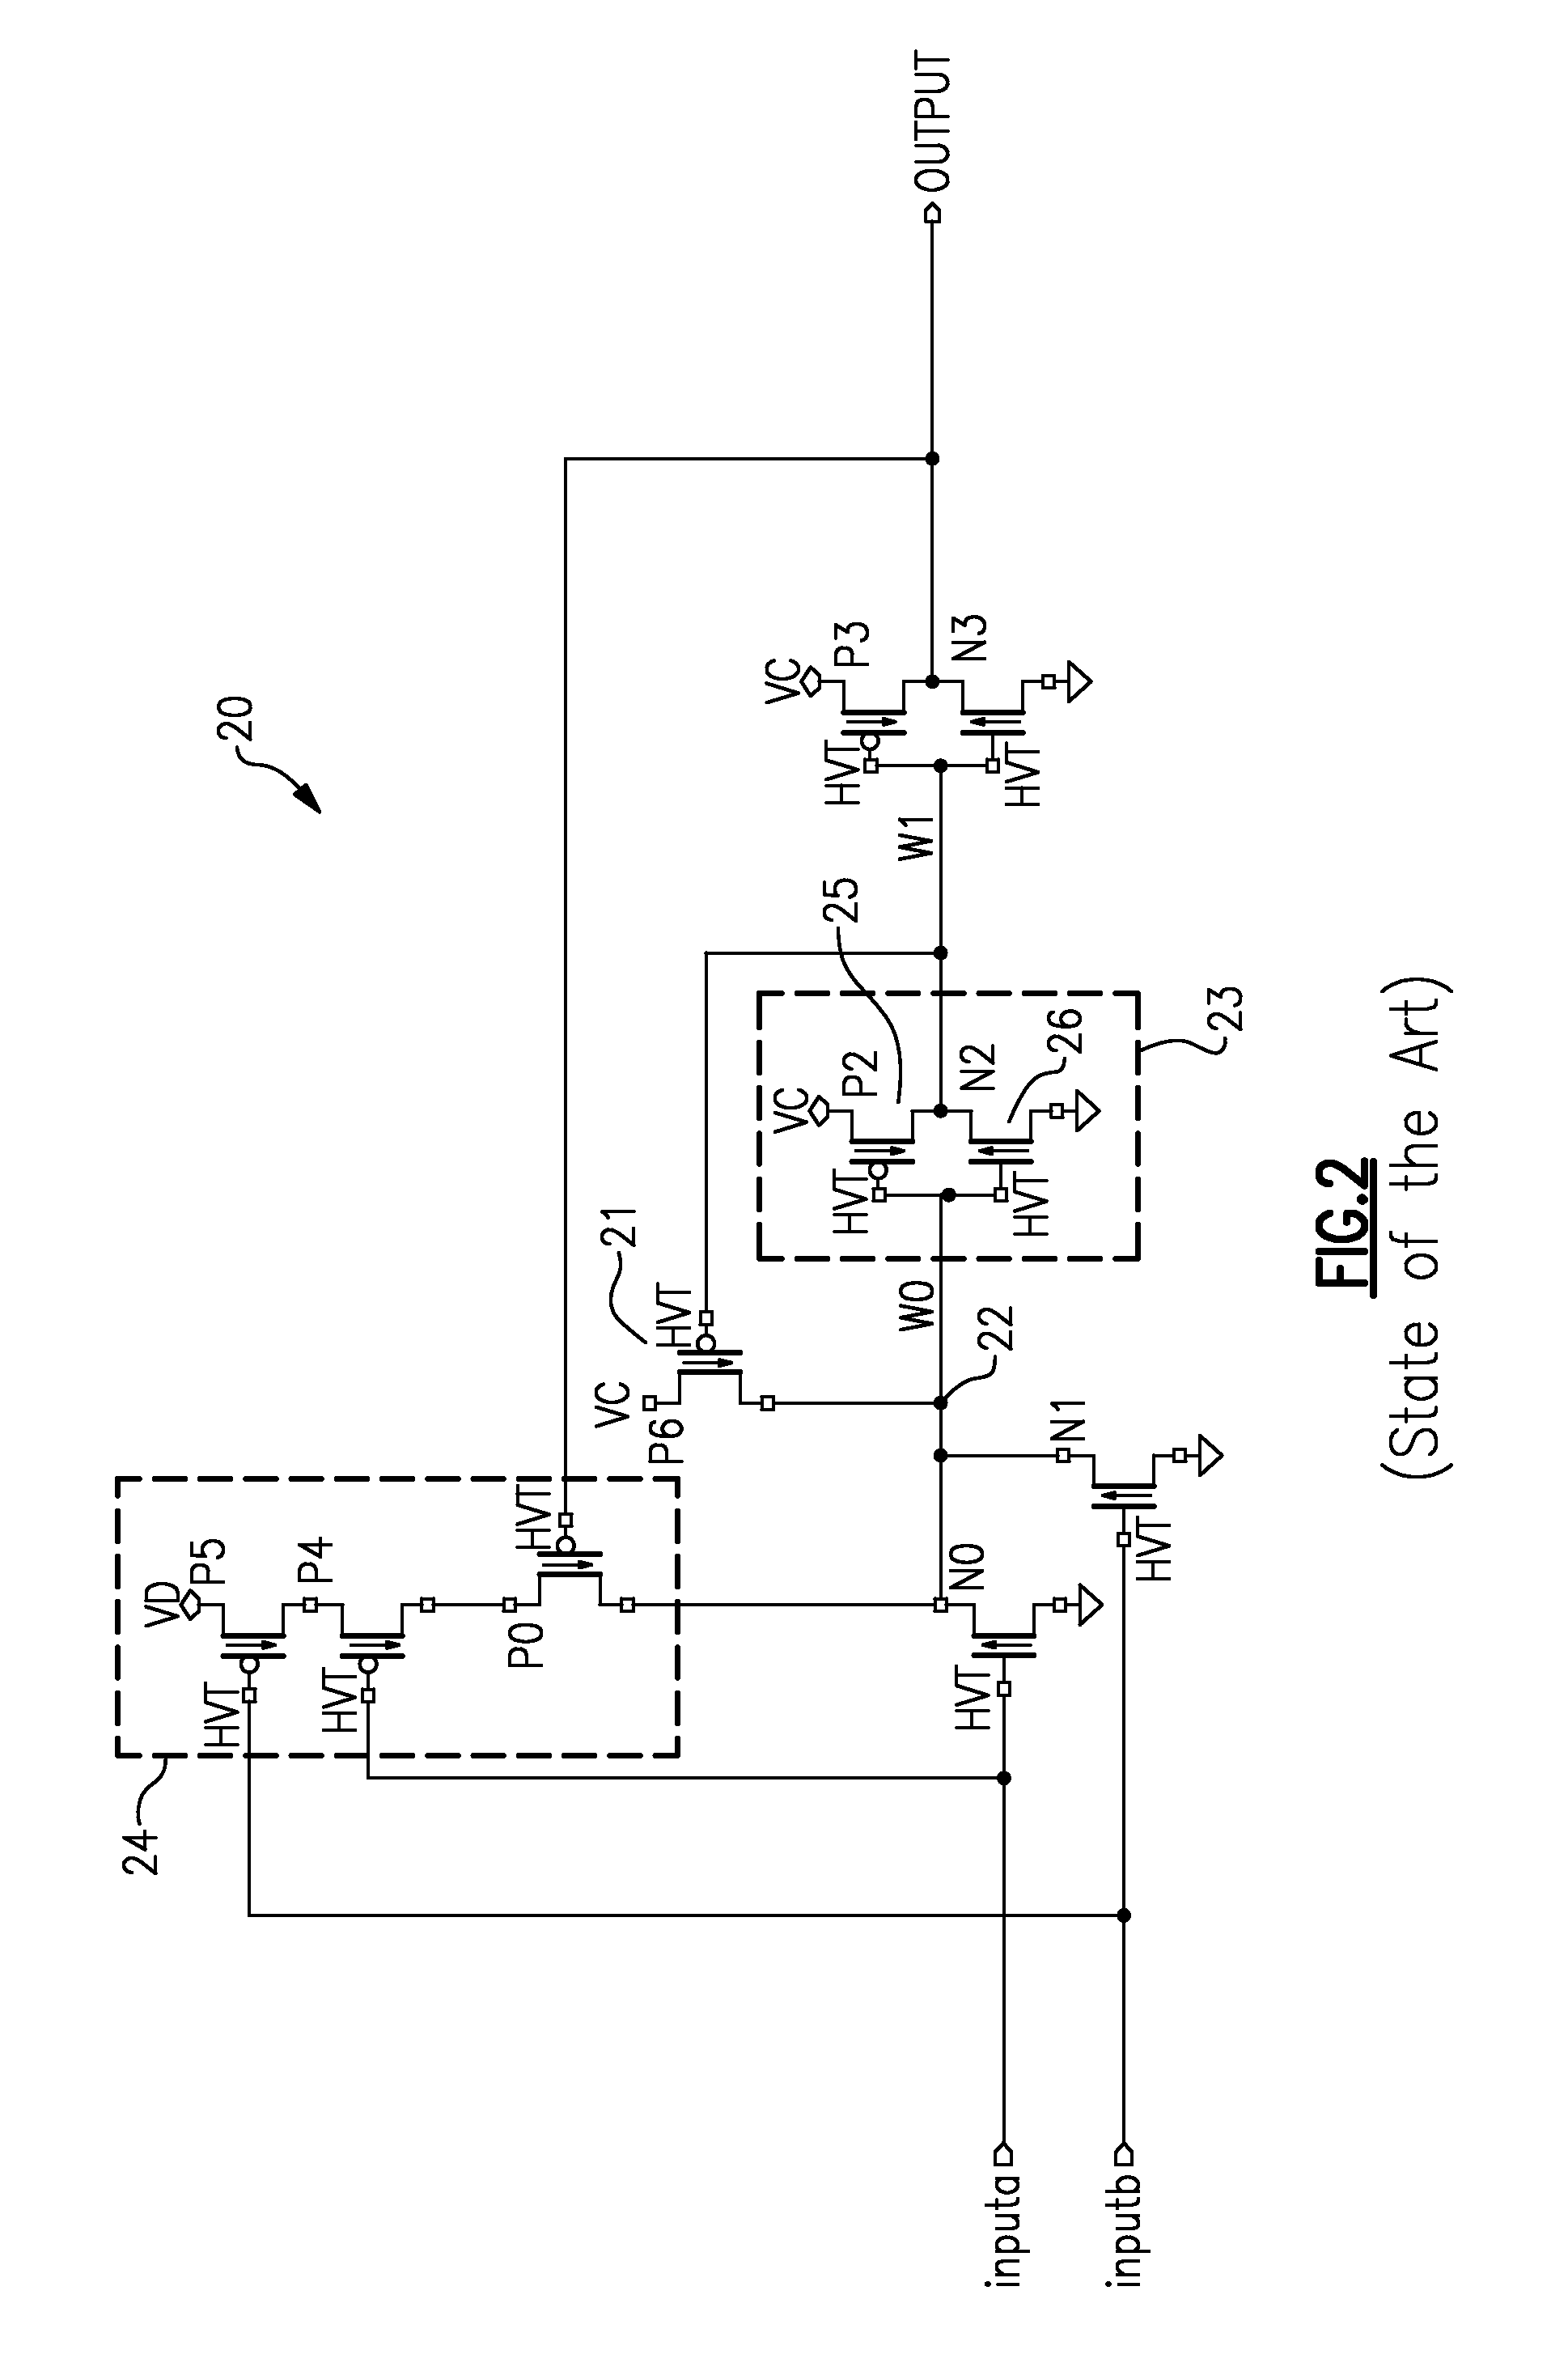 Circuit combining level shift function with gated reset